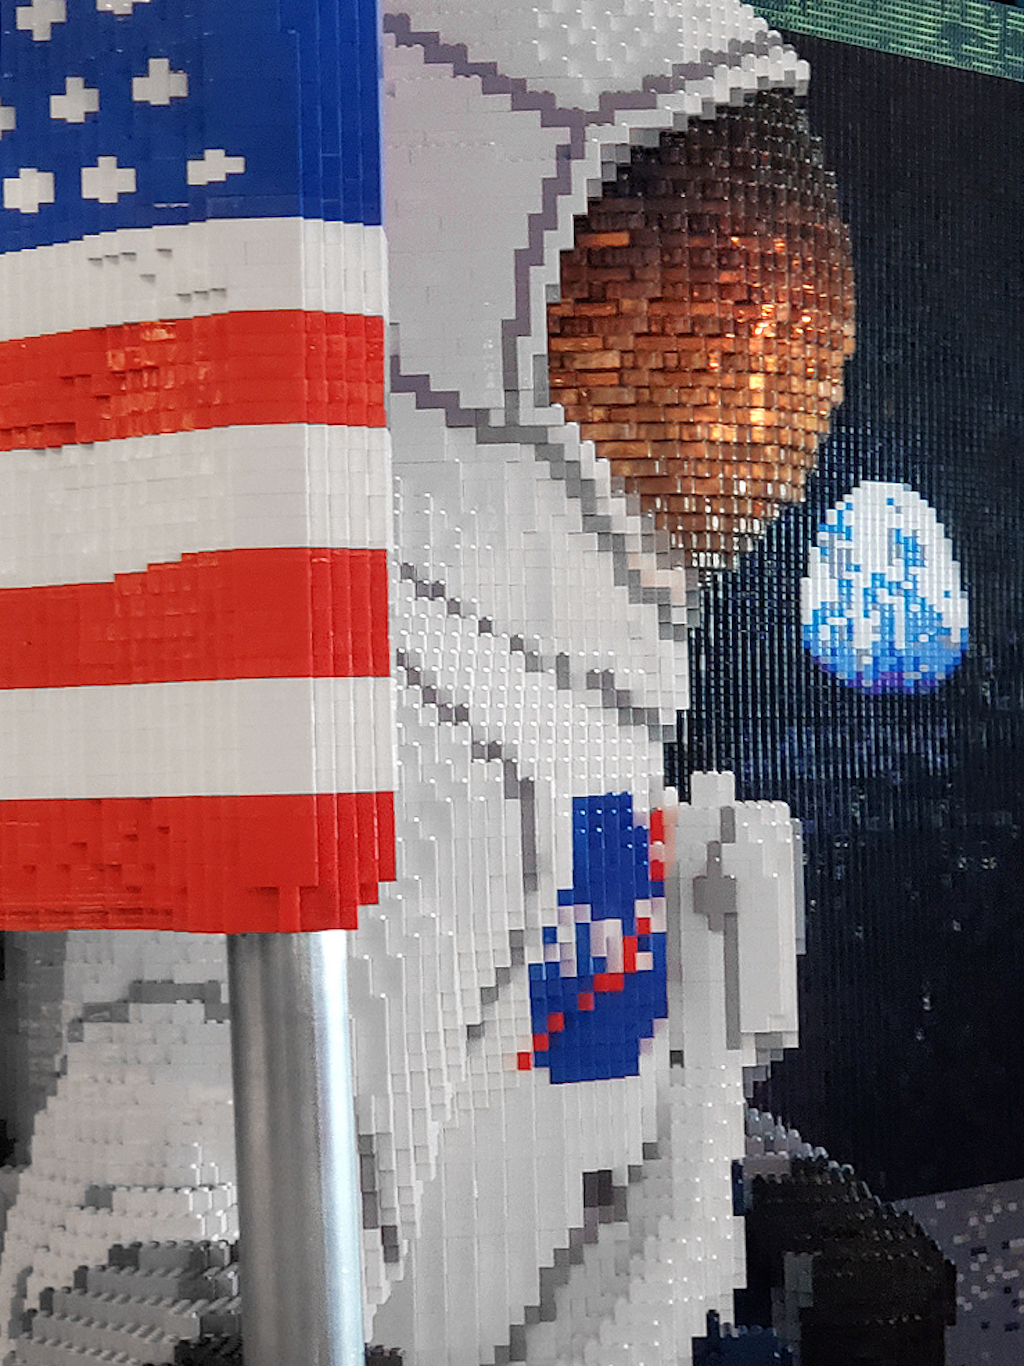 LEGO Built a Life-Sized Astronaut Model to Celebrate the 50th Anniversary  of Apollo 11